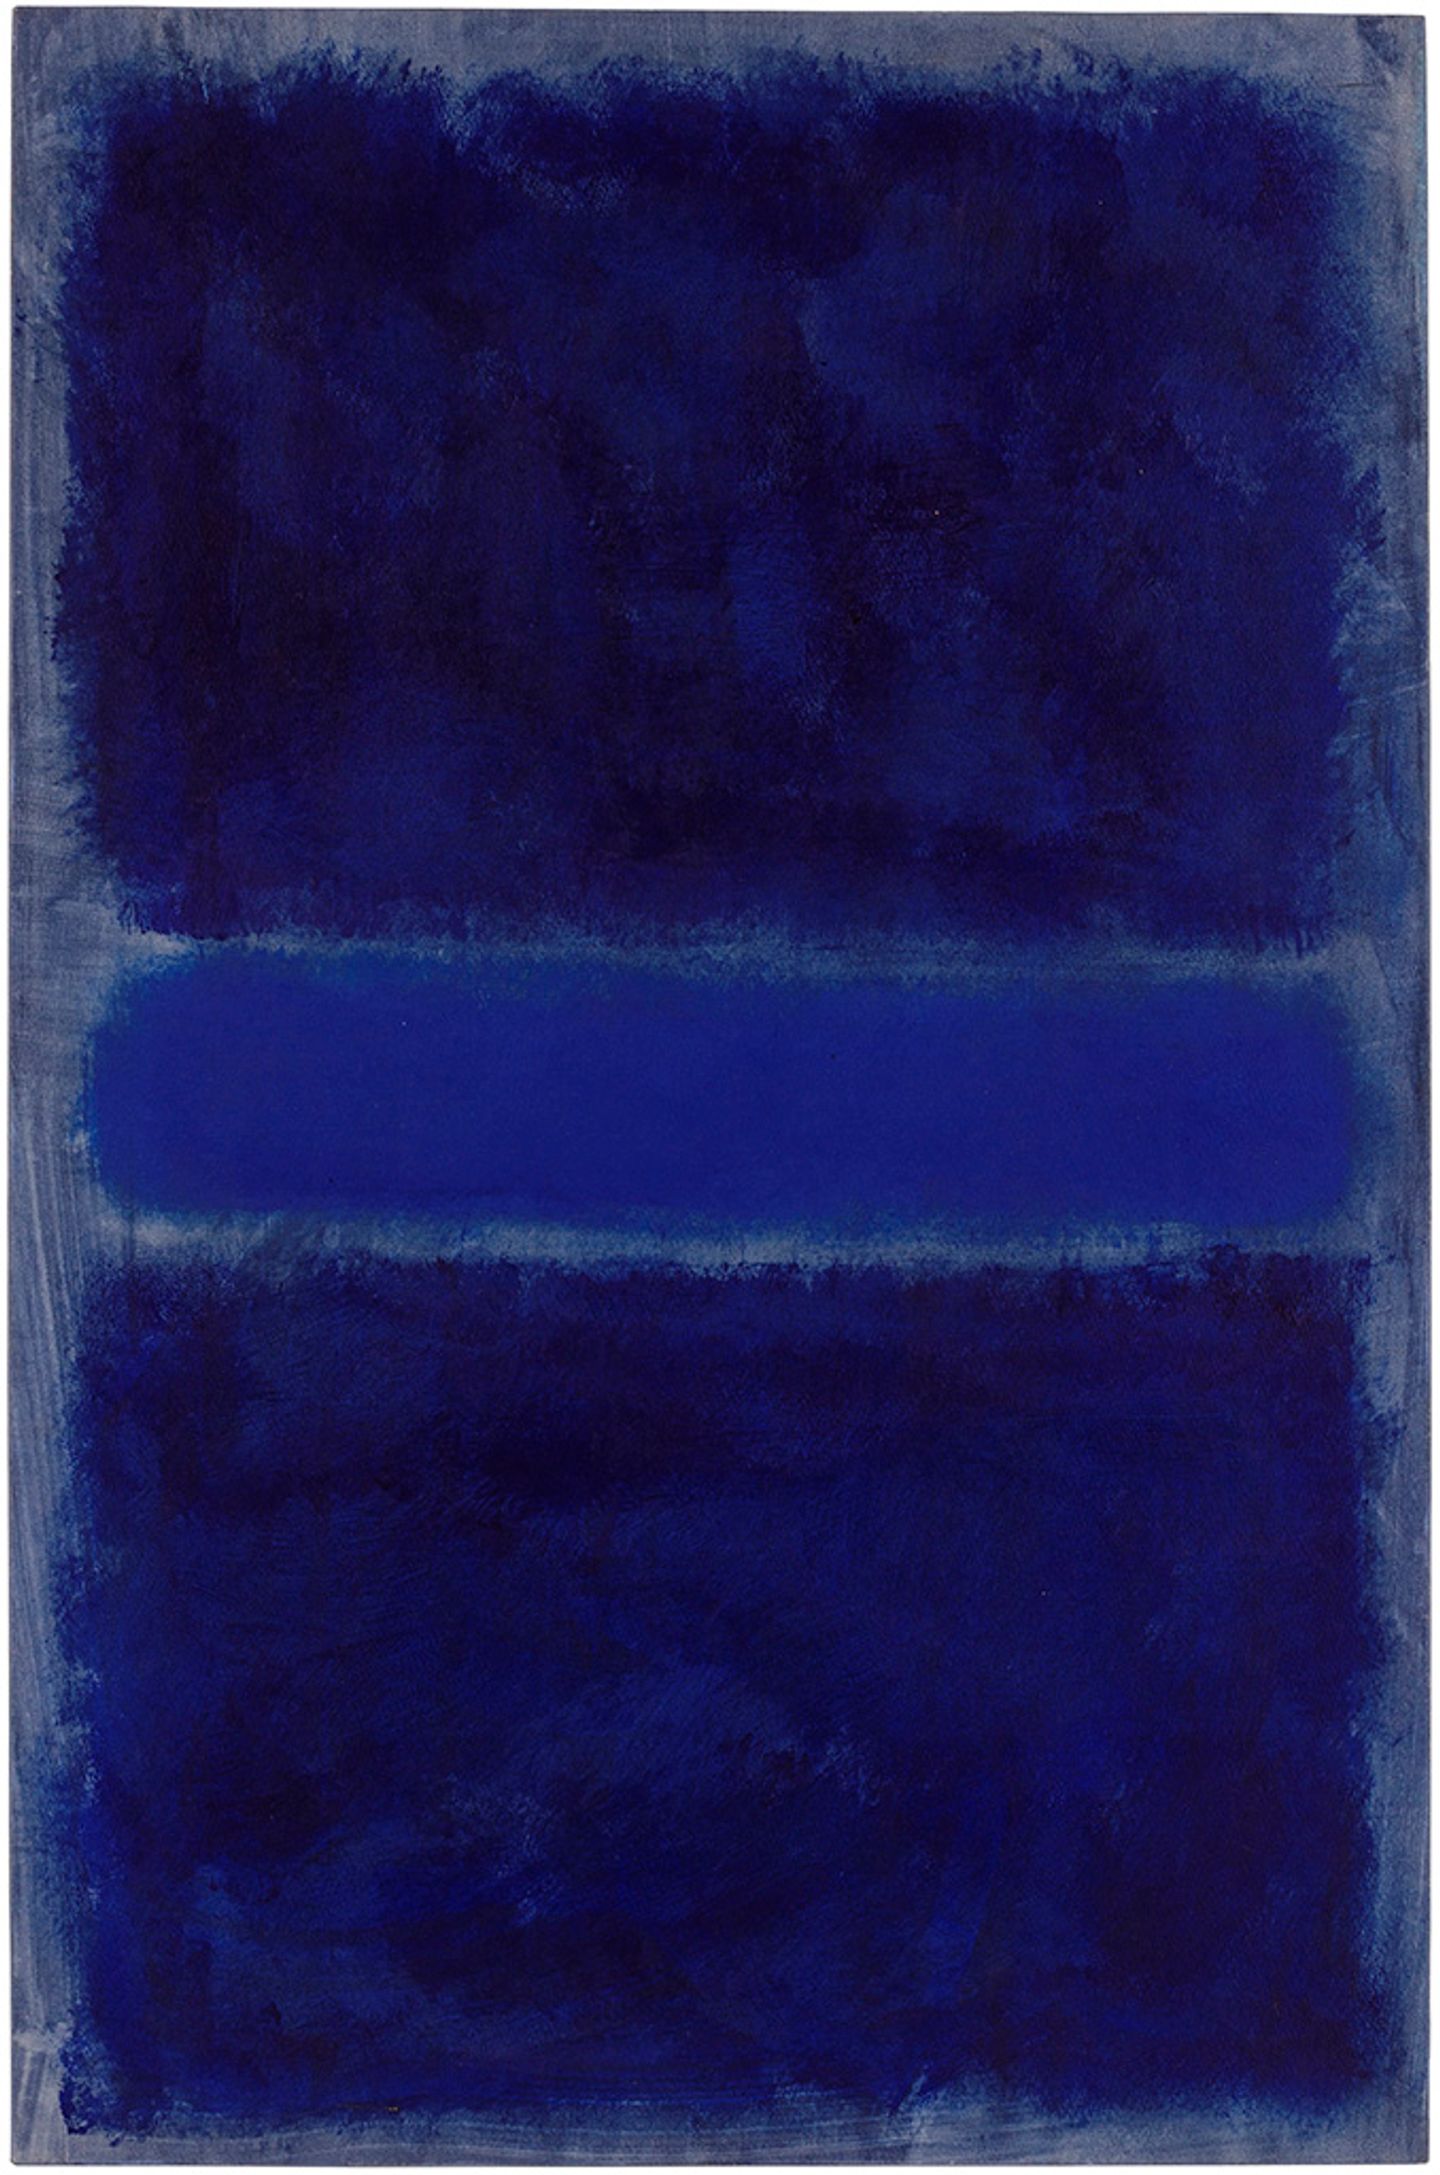 Mark Rothko, Untitled (1968). Oil on paper on canvas. 99.1 cm x 64 cm. © Kate Rothko Prizel and Christopher Rothko. Courtesy Pace Gallery.